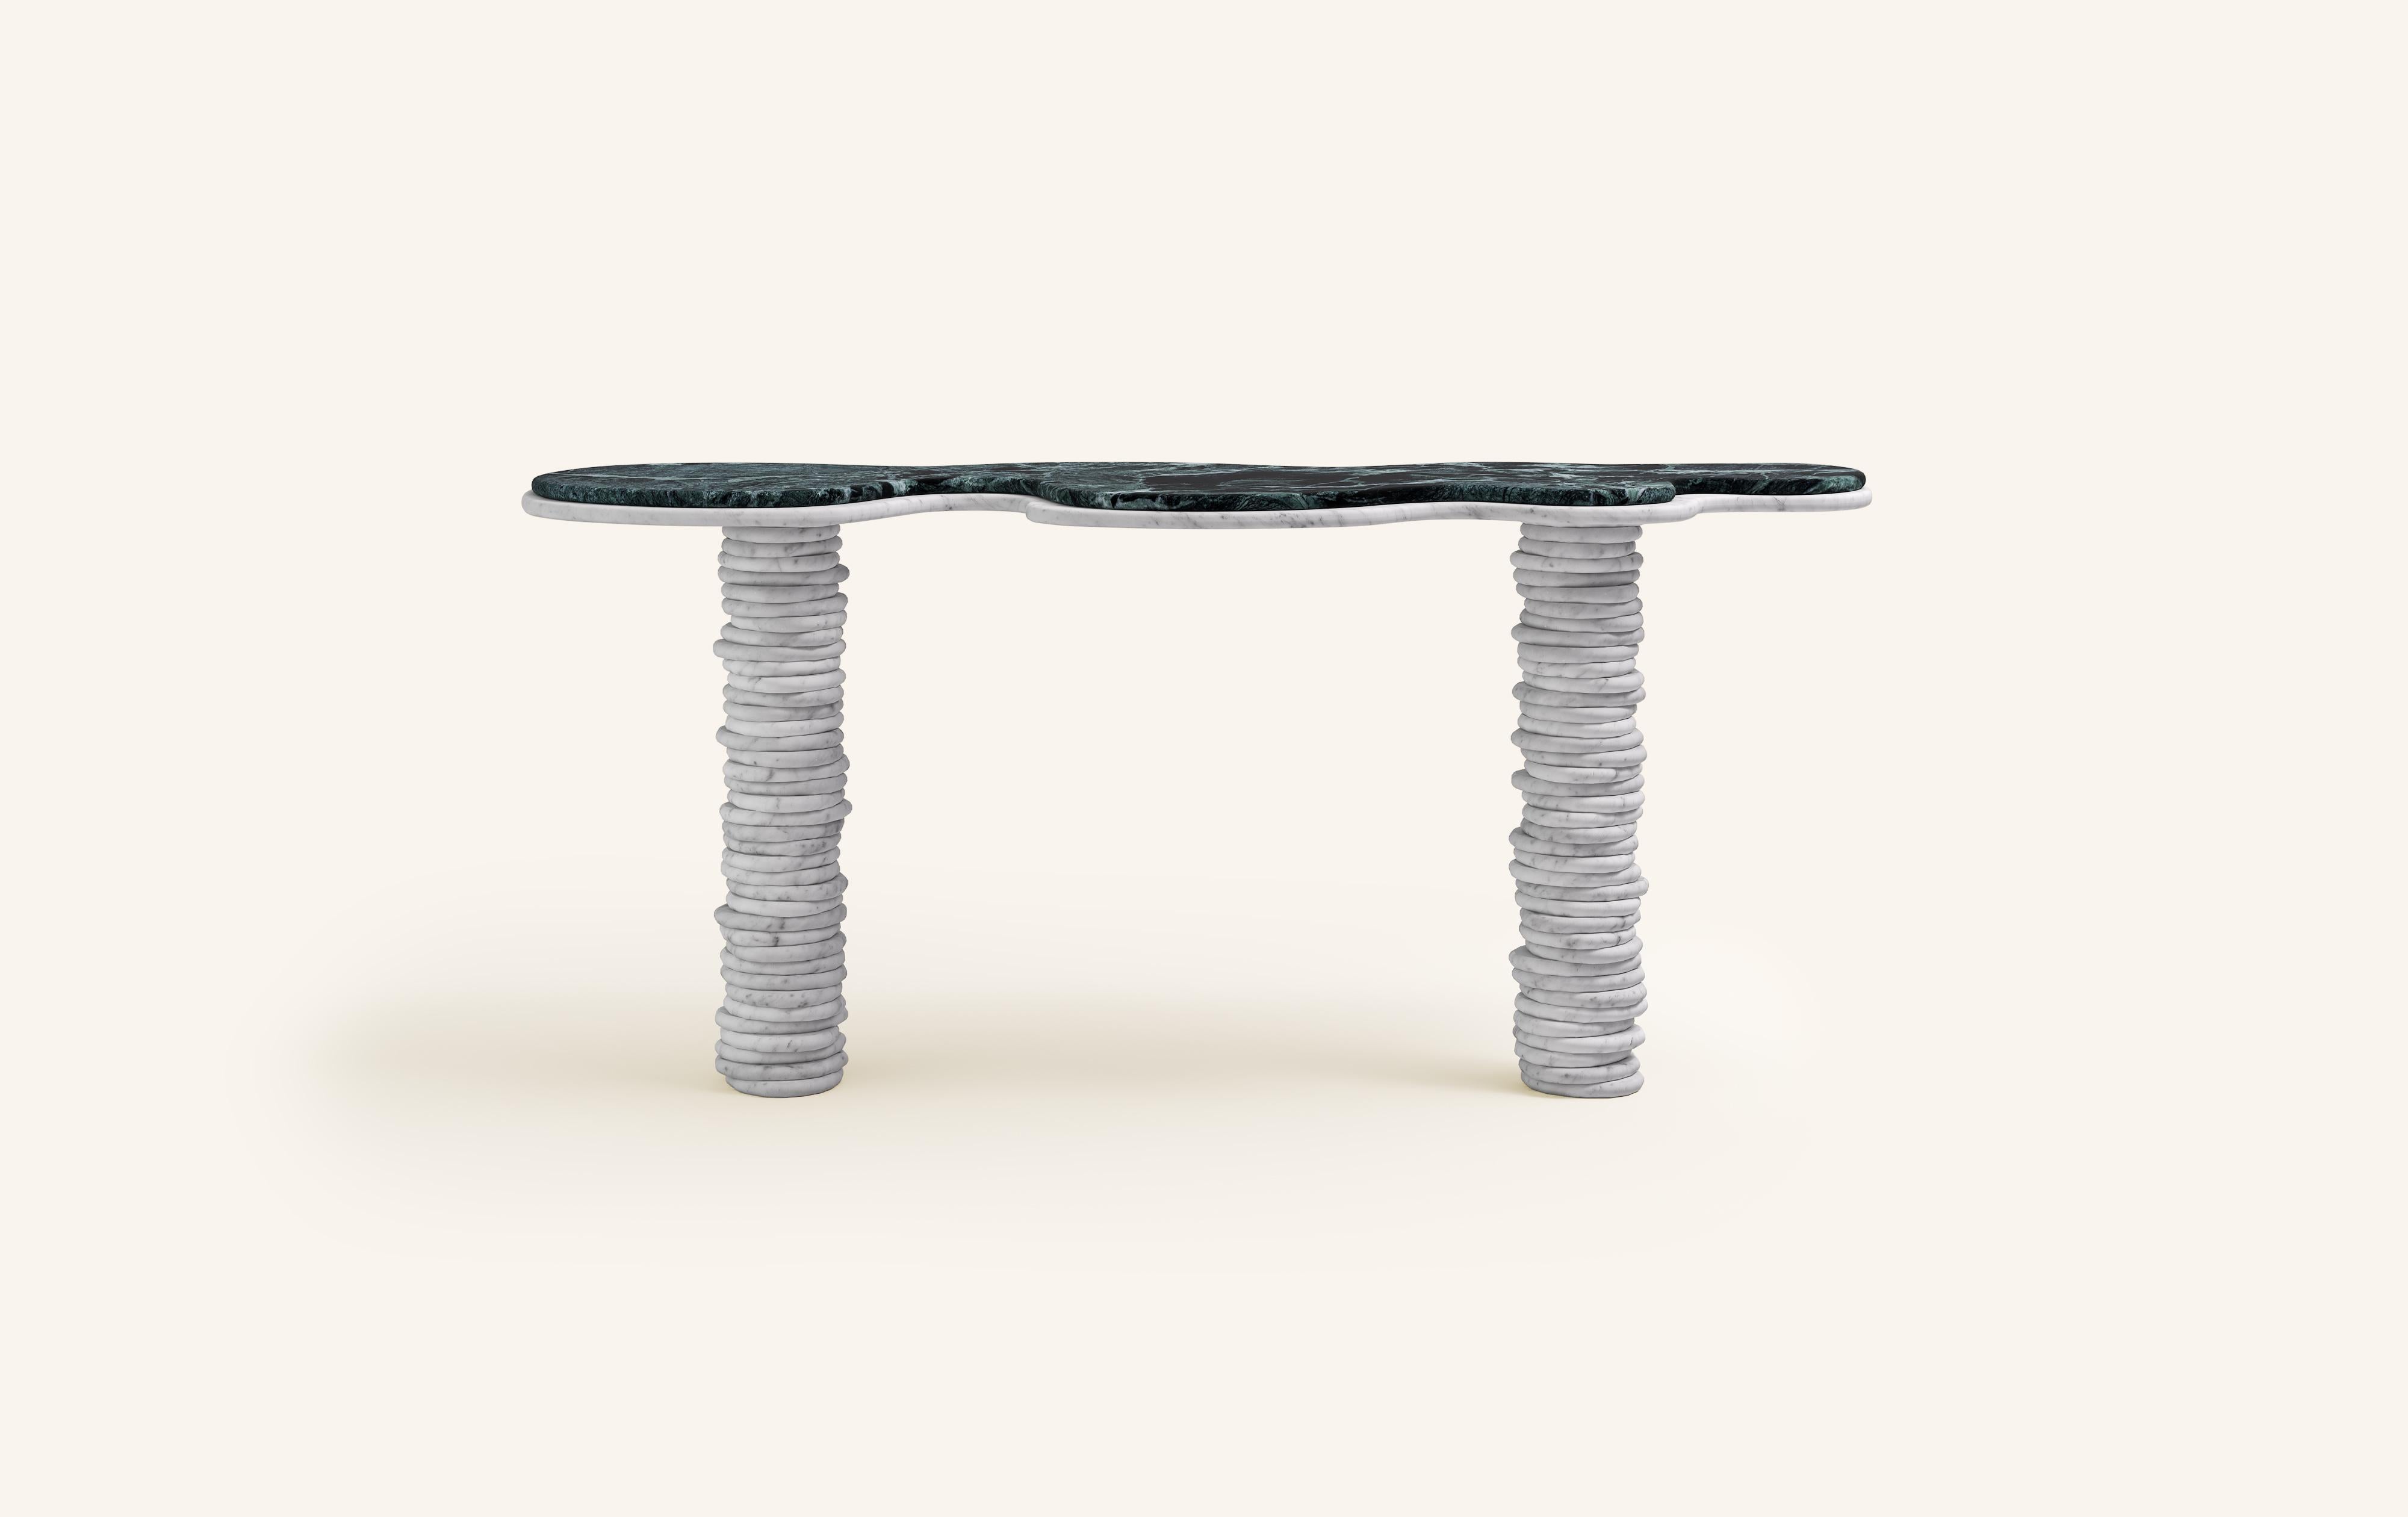 'ONDA', ITALIAN FOR 'WAVE', HAS INSPIRED A FREEFORM ORGANIC BODY, HEROING A COMPLEX AND TEXTURED COLLECTION. COMPRISING SIDE TABLES FOR LAYERING, COFFEE TABLES AND DINING TABLES.

DIMENSIONS:
72”L x 21”W x 29-3/4”H: 
- 1.5